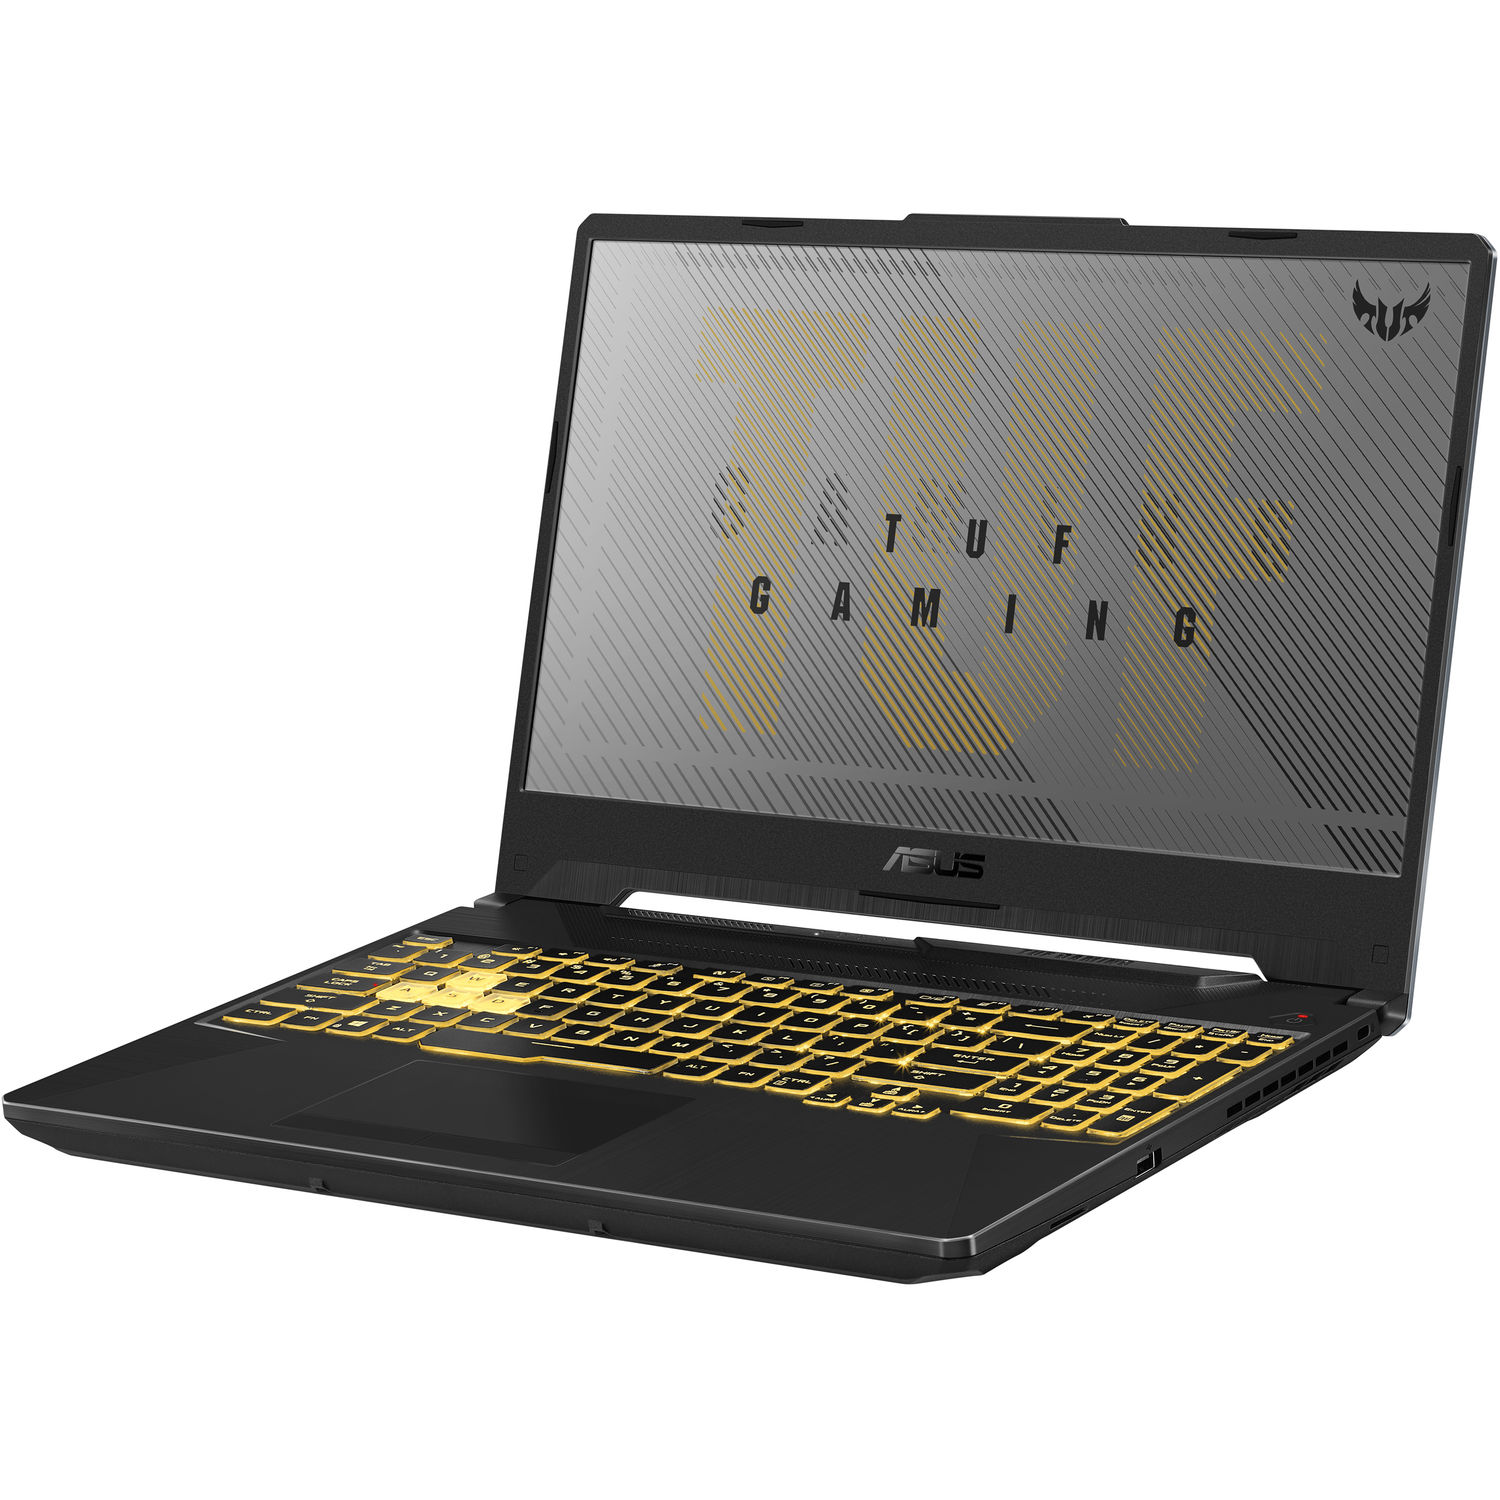 ASUS TUF A15 Gaming and Entertainment Laptop (AMD Ryzen 7 4800H 8-Core, 8GB RAM, 2TB HDD, 15.6" Full HD (1920x1080), NVIDIA GTX 1650 Ti, Wifi, Bluetooth, Webcam, 1xHDMI, Backlit Keyboard, Win 10 Pro) - image 3 of 6